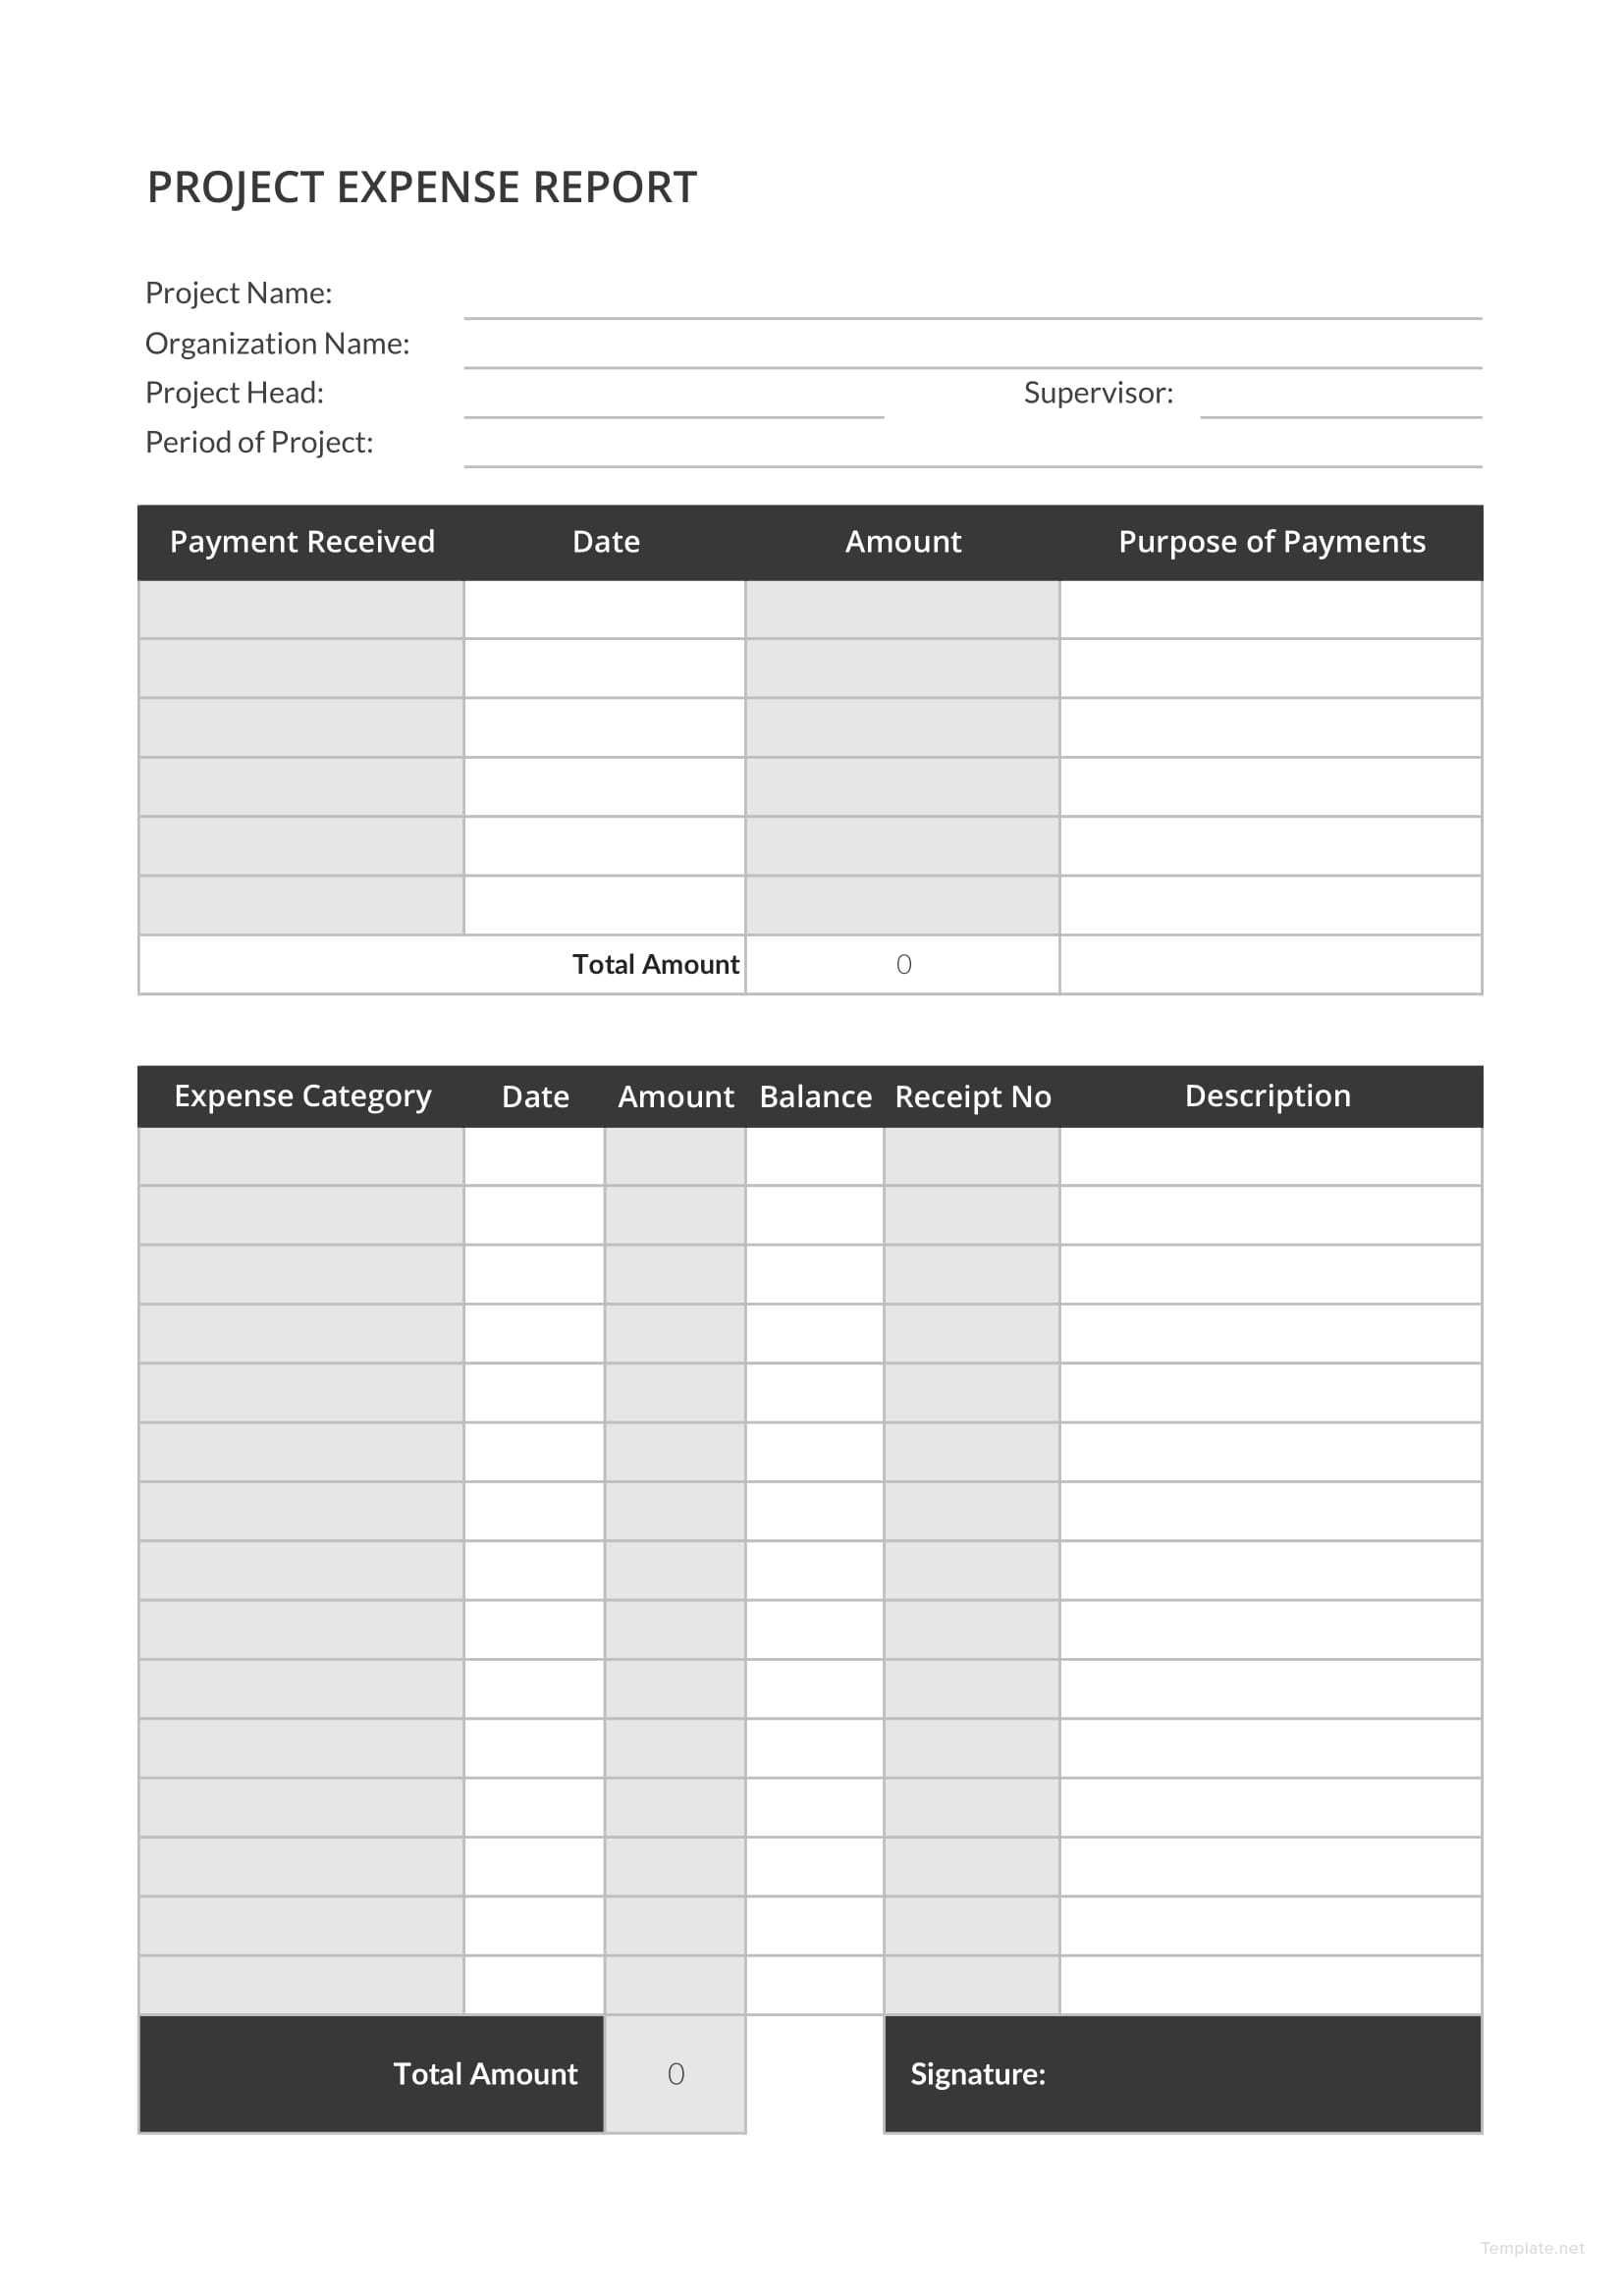 Project Expense Report Template in Microsoft Word, Excel ...